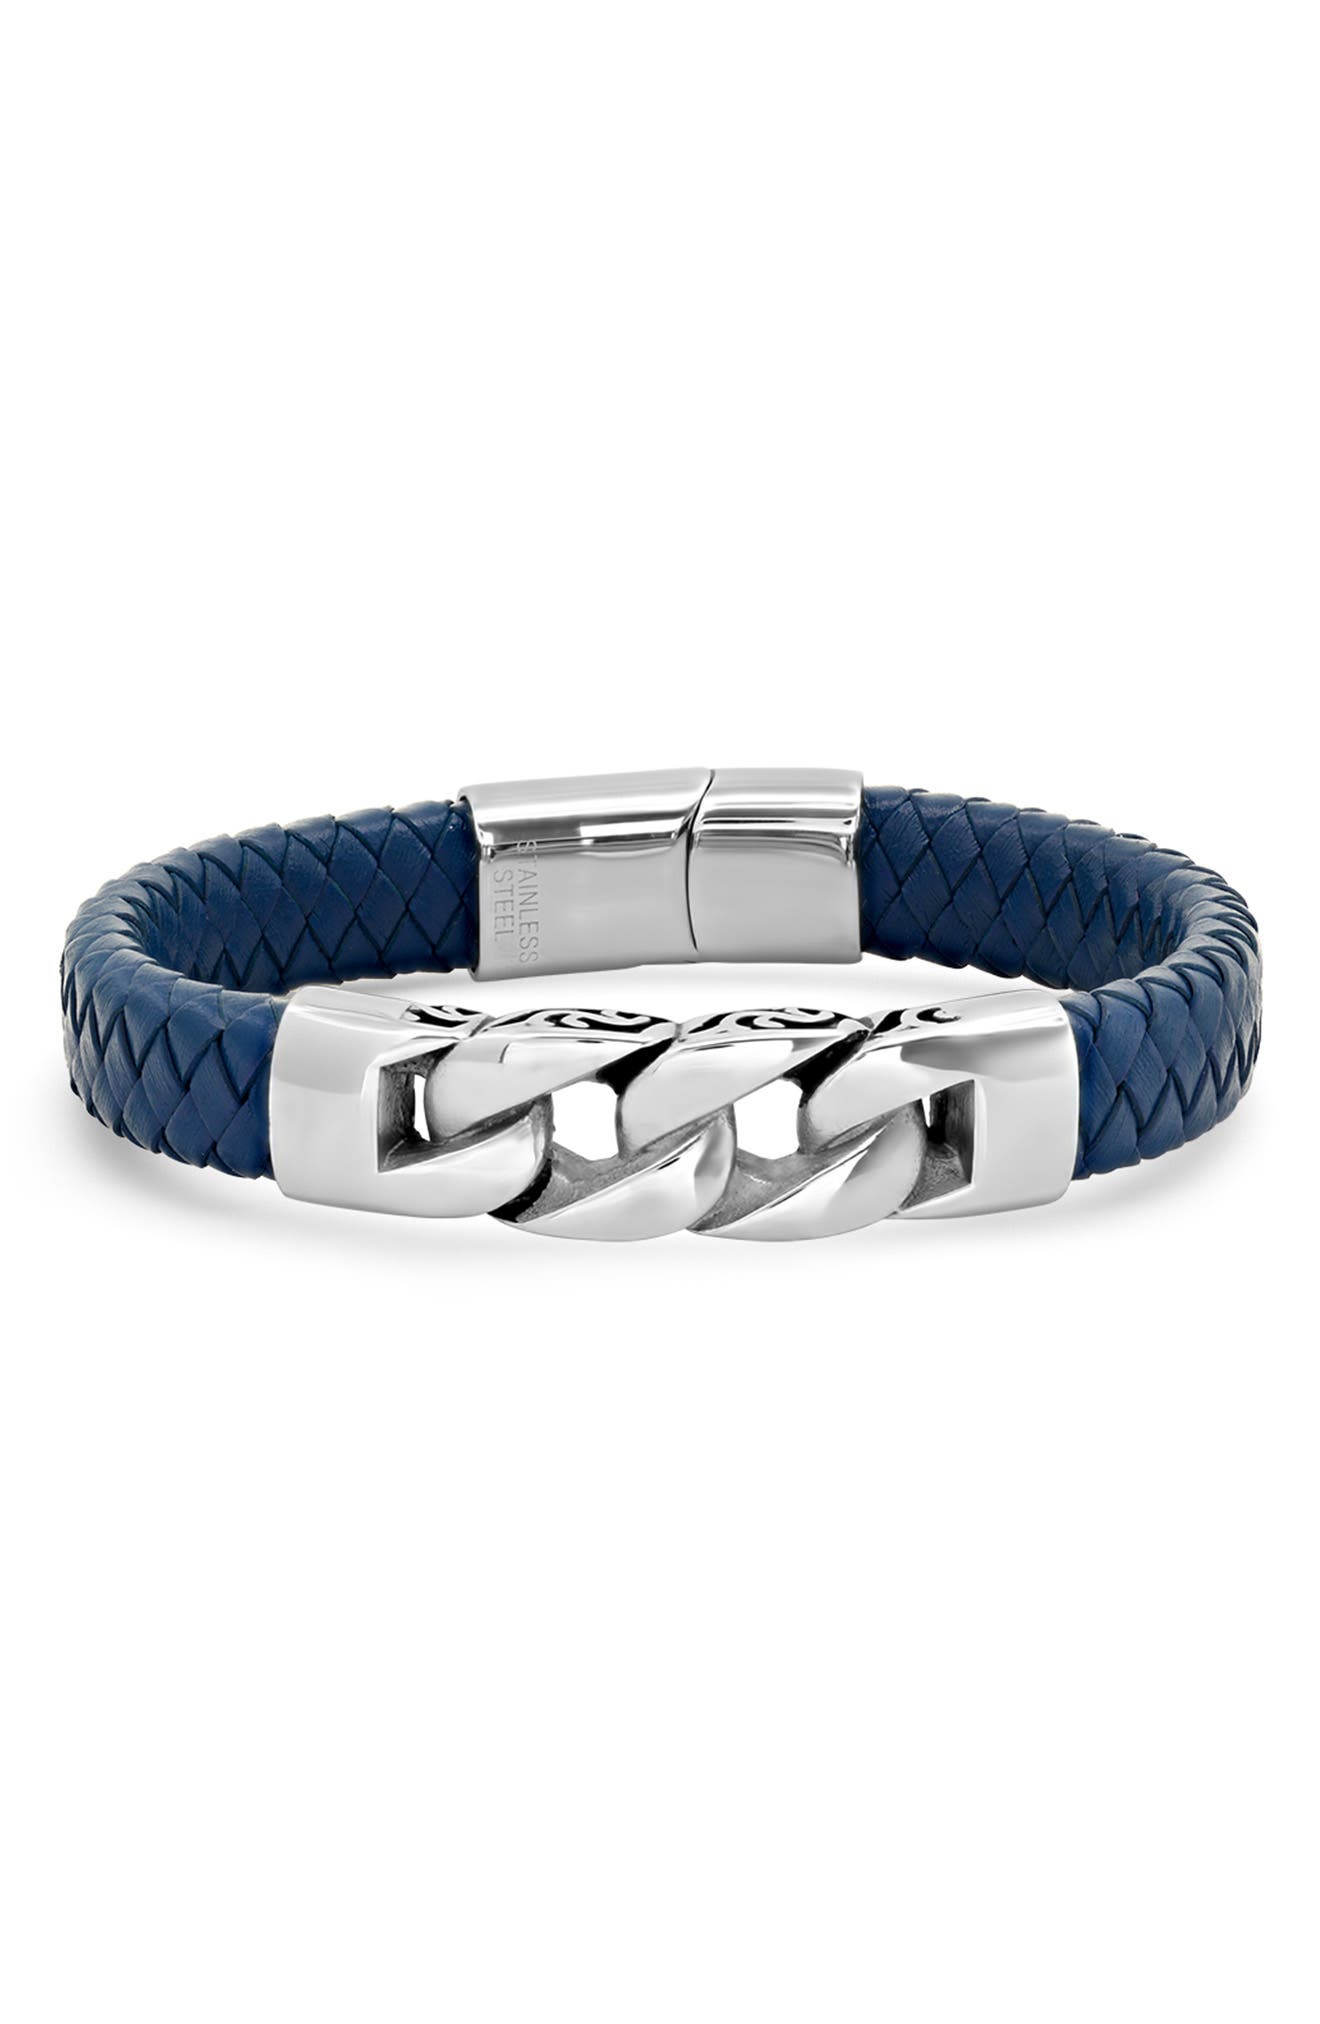 Hmy Jewelry Stainless Steel Link Blue Braided Leather Bracelet In Blue-yellow